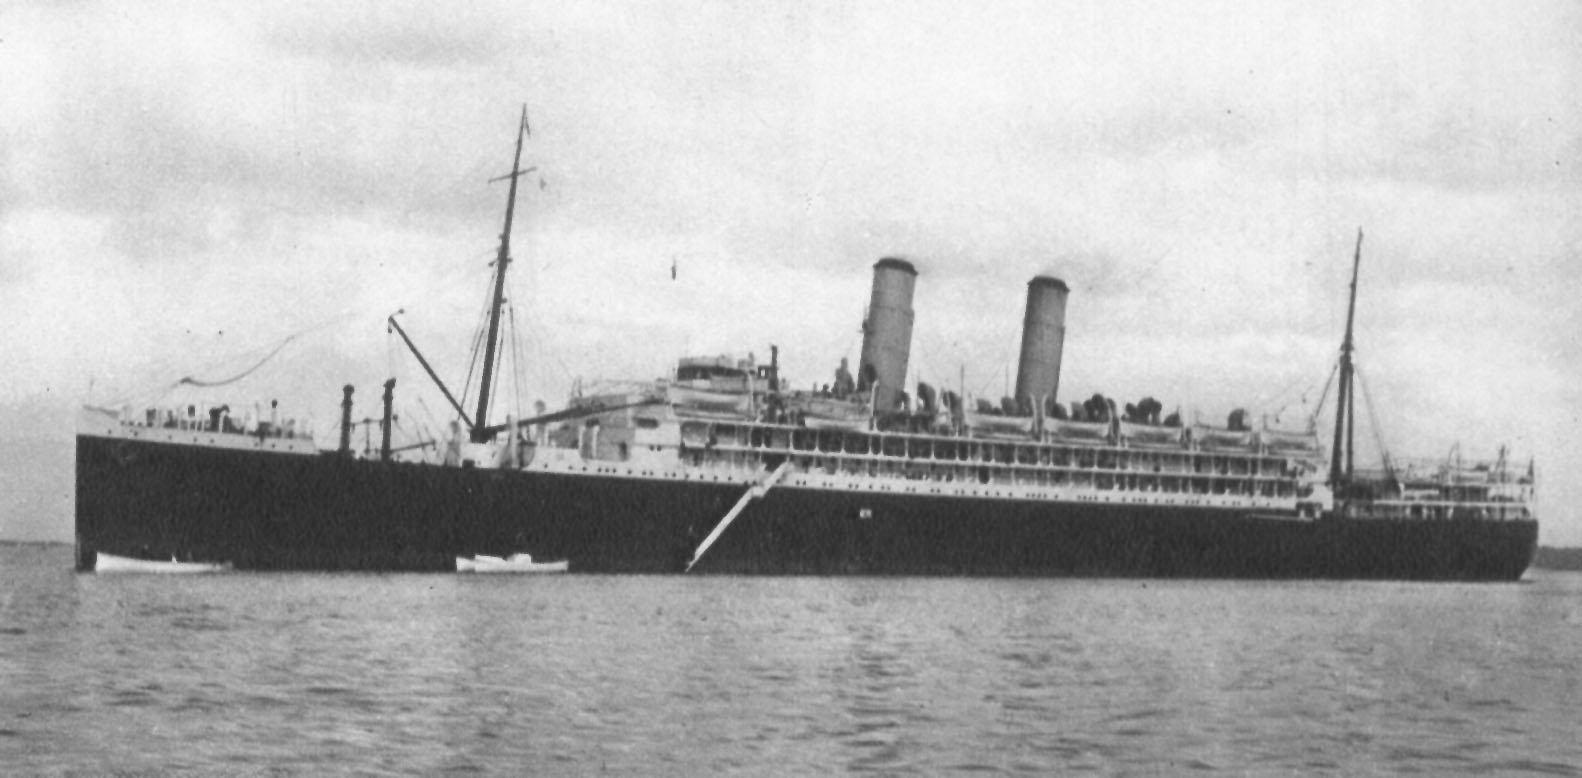 Passenger Vessel "Ormonde", launched February 1917 and completed in October 1917.  Built by John Brown & Co, Glasgow, Scotland.  This vessel took her inaugural voyage on 15 November 1918 from London - Brisbane.  Owned by Orient Line.
Base Port:  London
